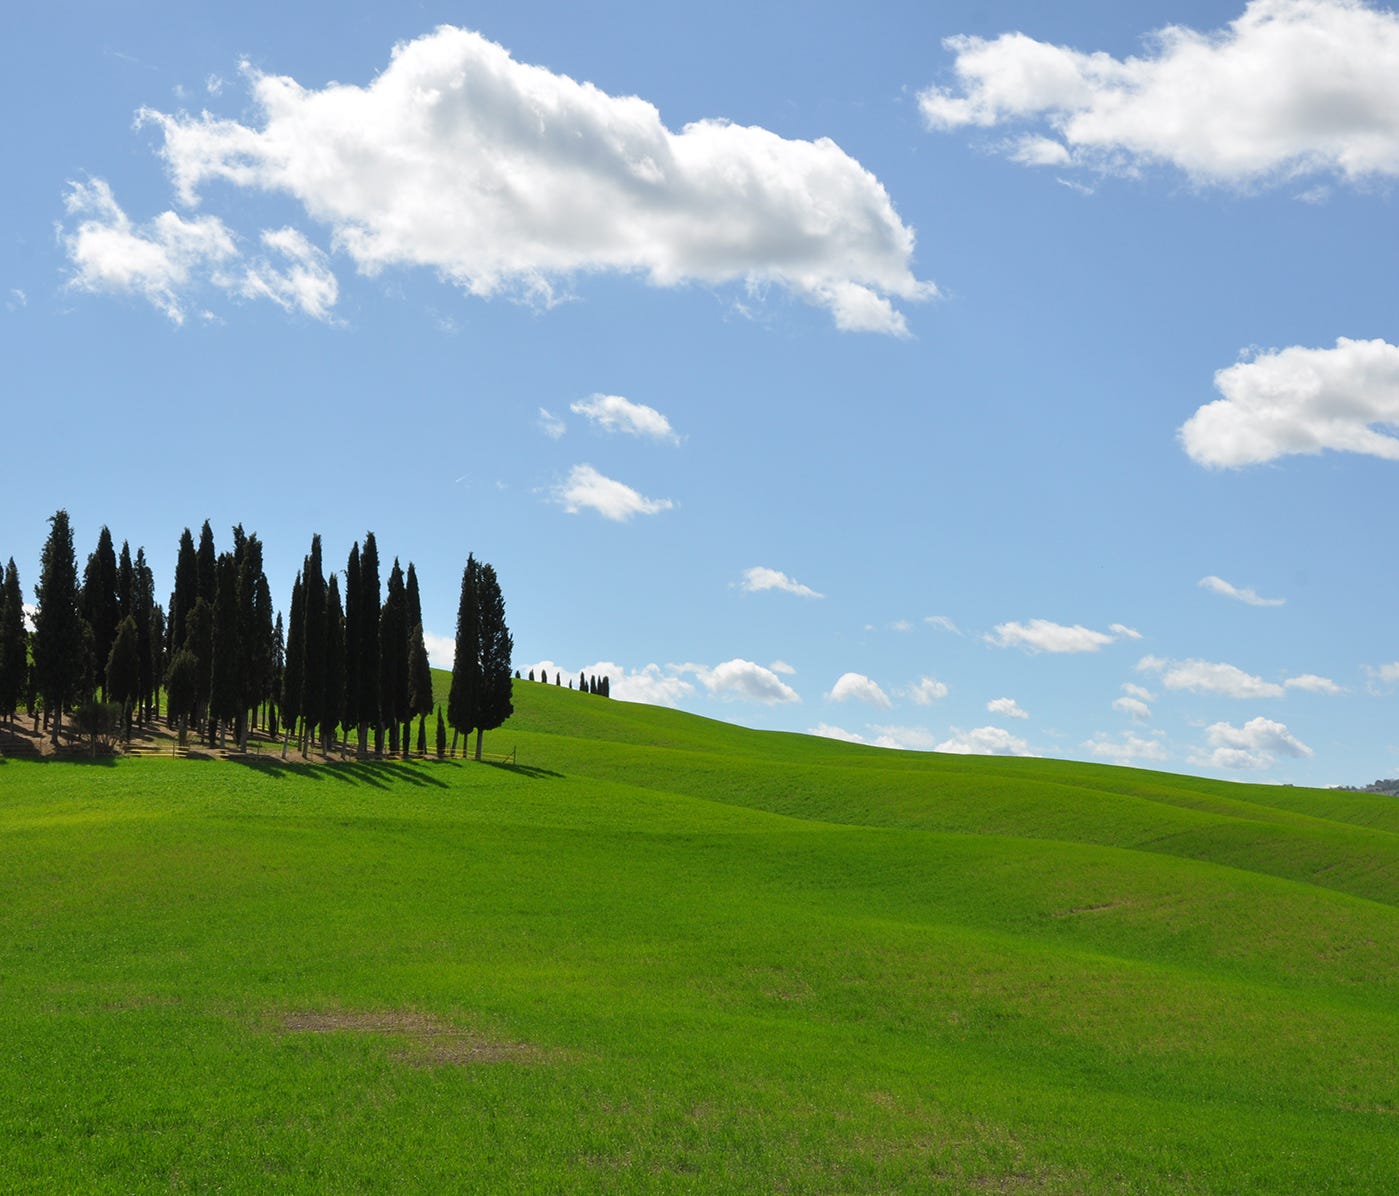 Much of the Tuscan countryside is a confection of green hills and blue sky.